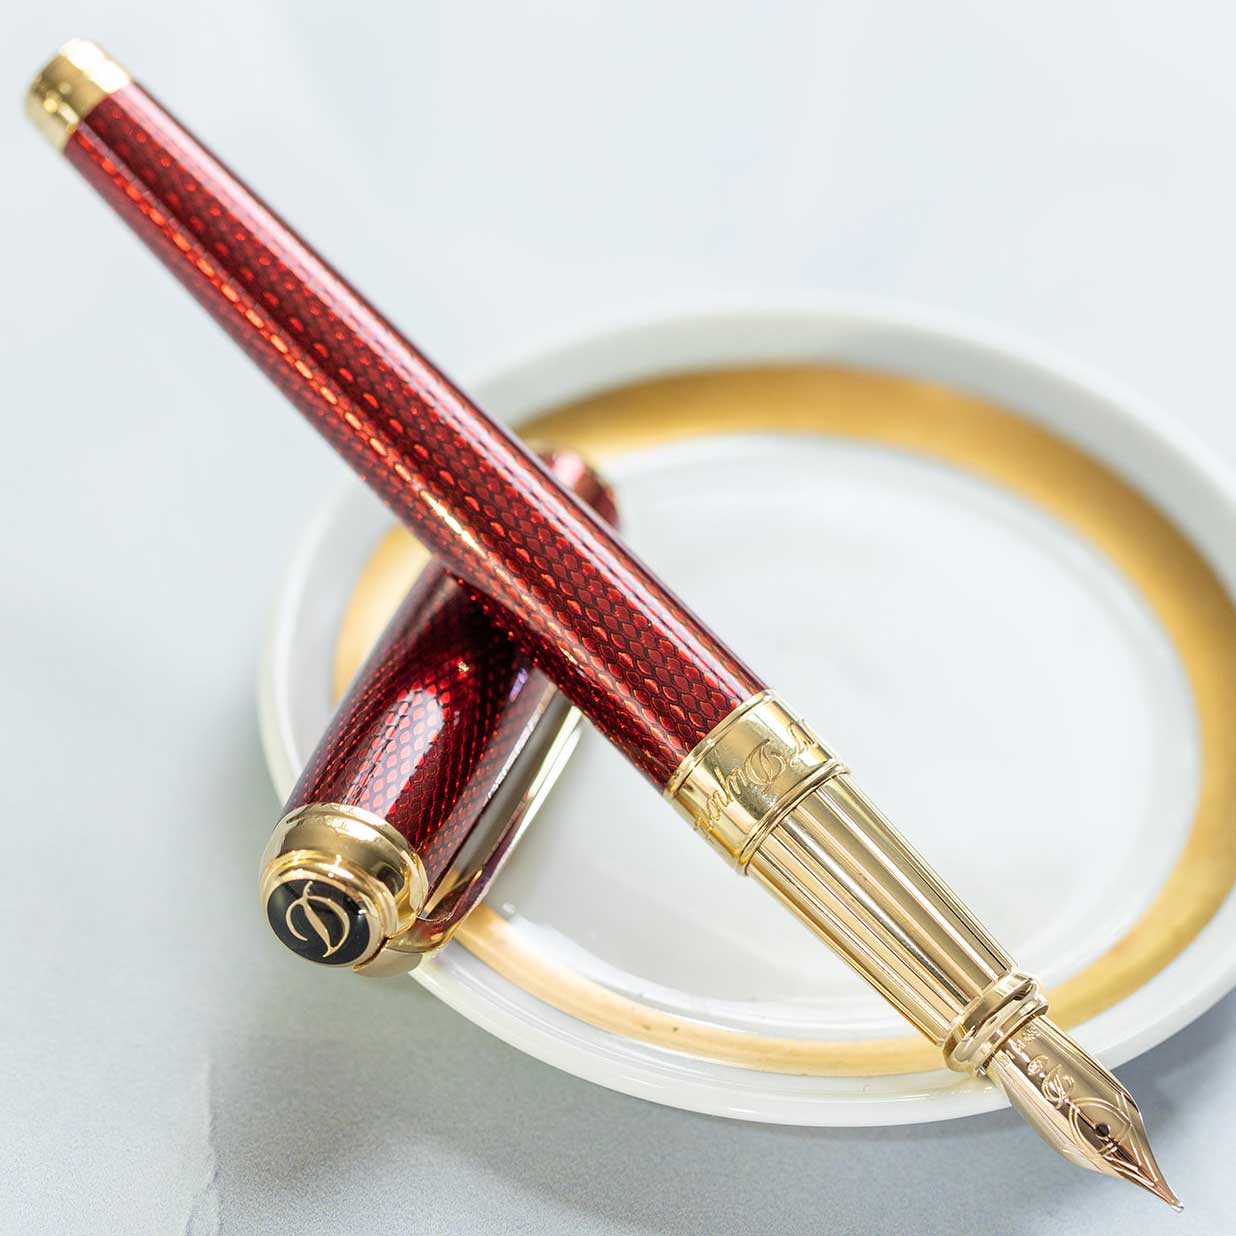 Fraude Huisdieren veer S.T. Dupont Line D Diamond Guilloche Large Fountain Pen – Ruby, Gold Trim –  US Exclusive – The Nibsmith